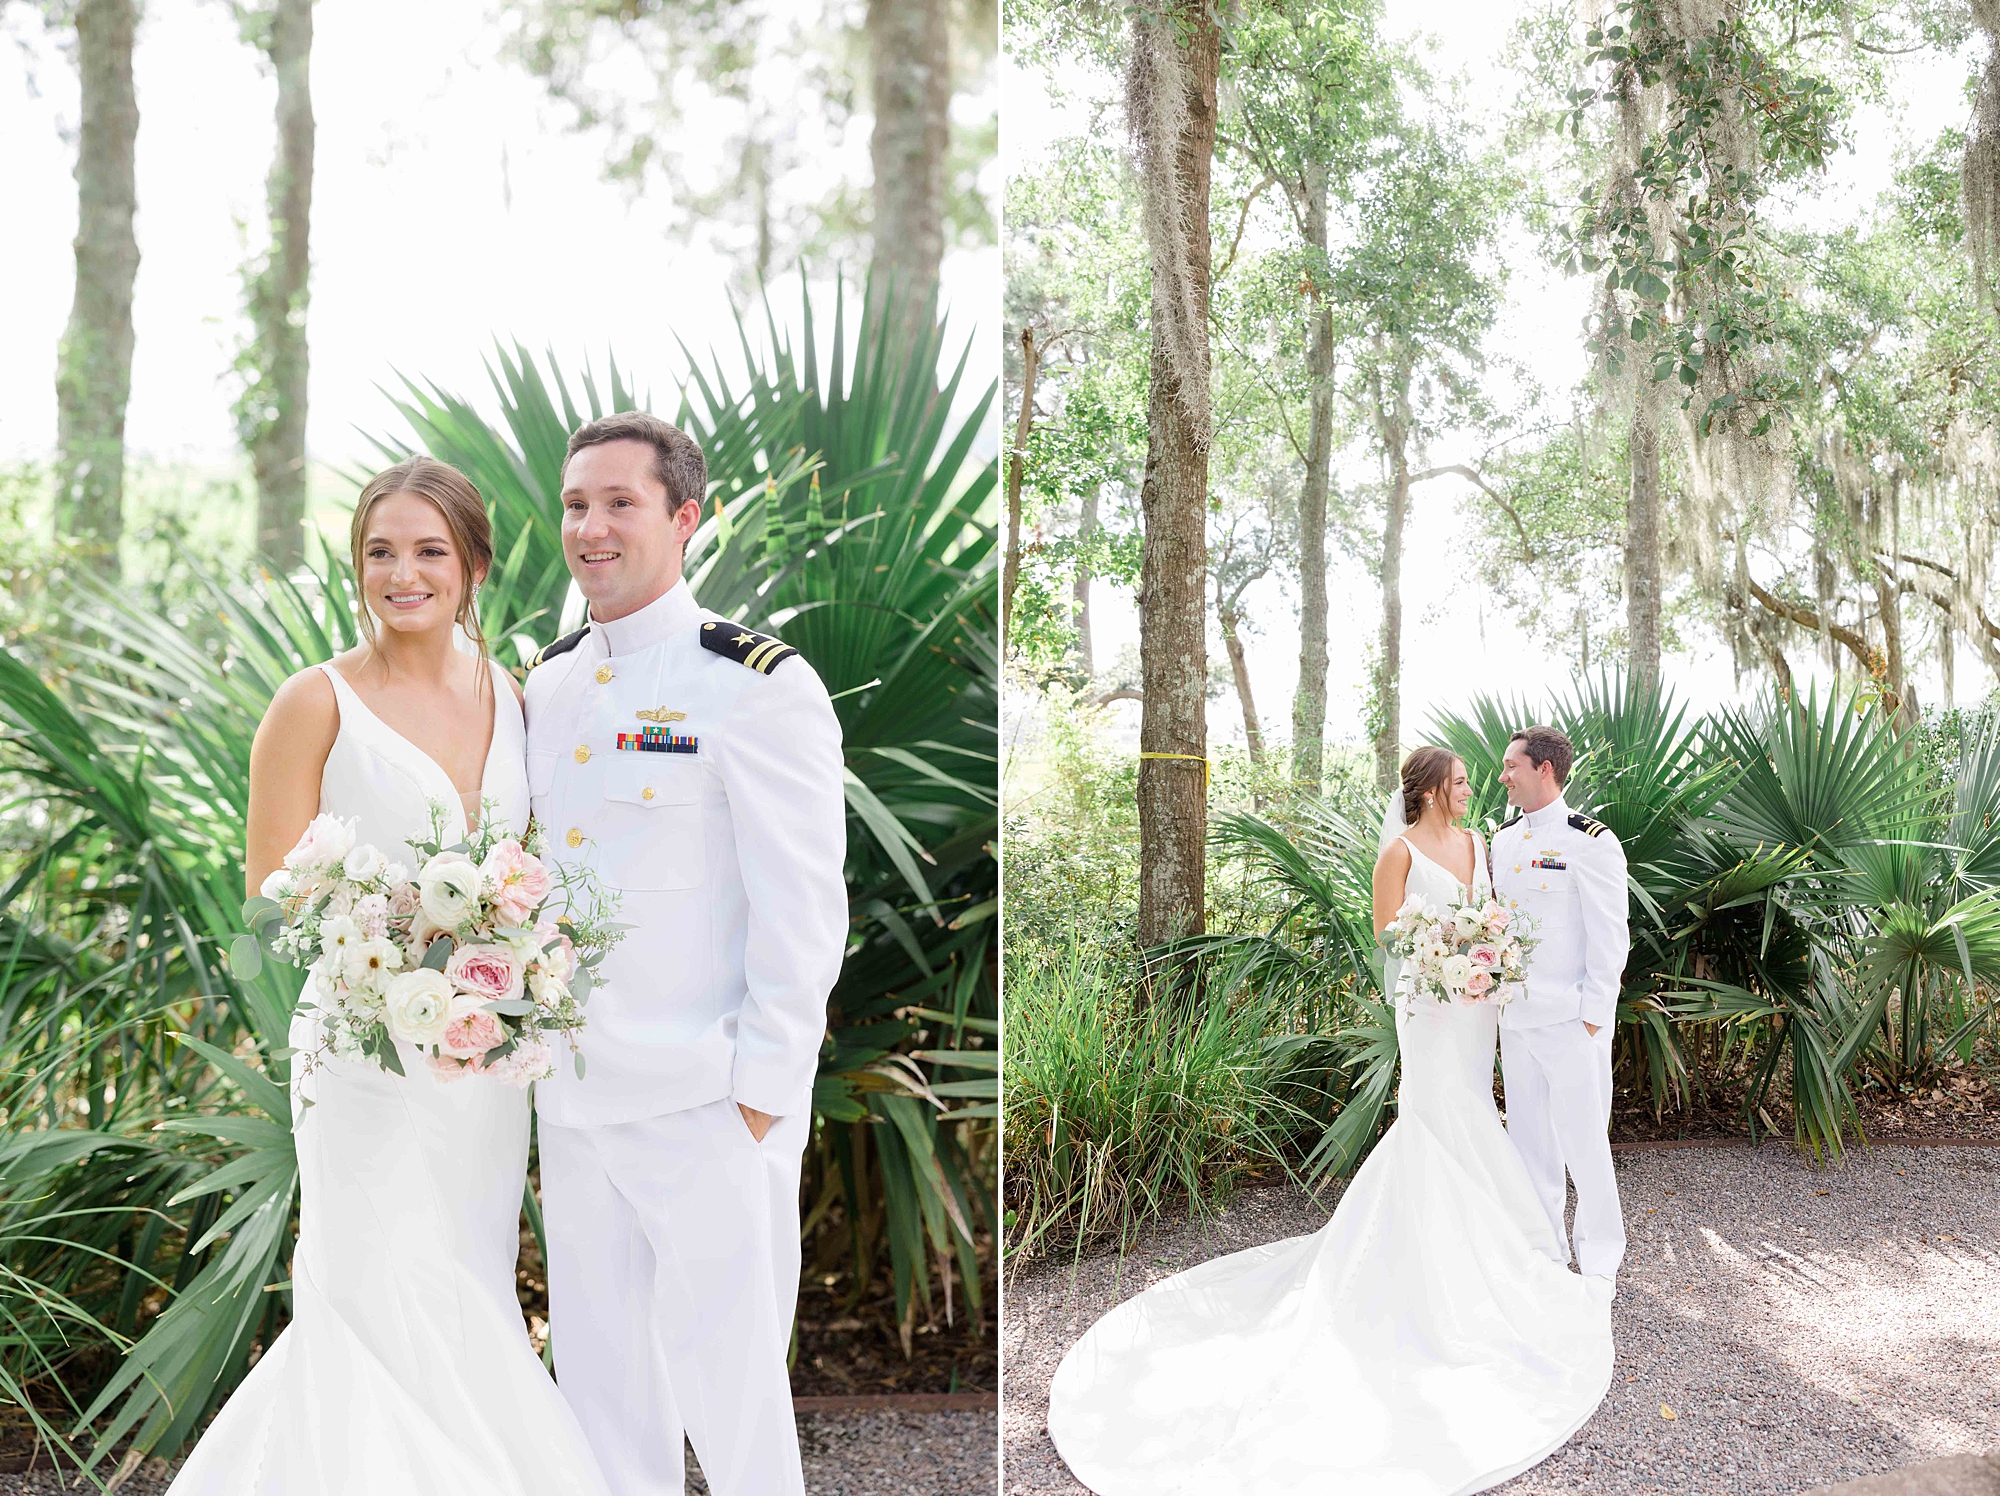 Naval officer poses with bride near palm trees at Club Creek at Ion